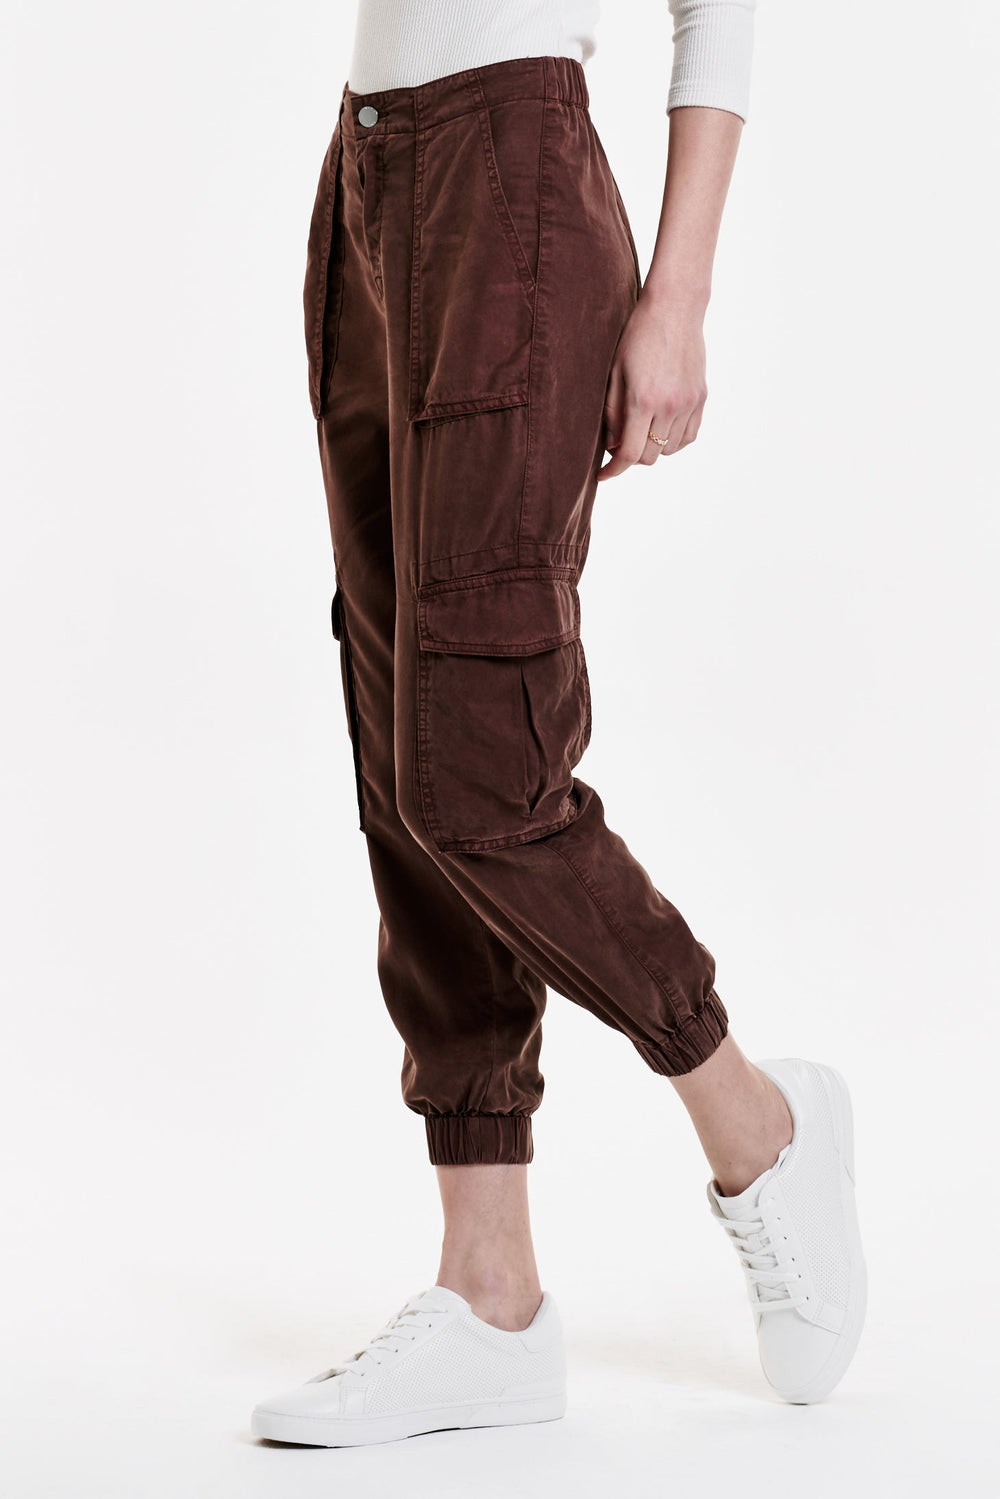 image of a female model wearing a SANDY SUPER HIGH RISE ANKLE TROUSER PANTS CHESTNUT PANTS